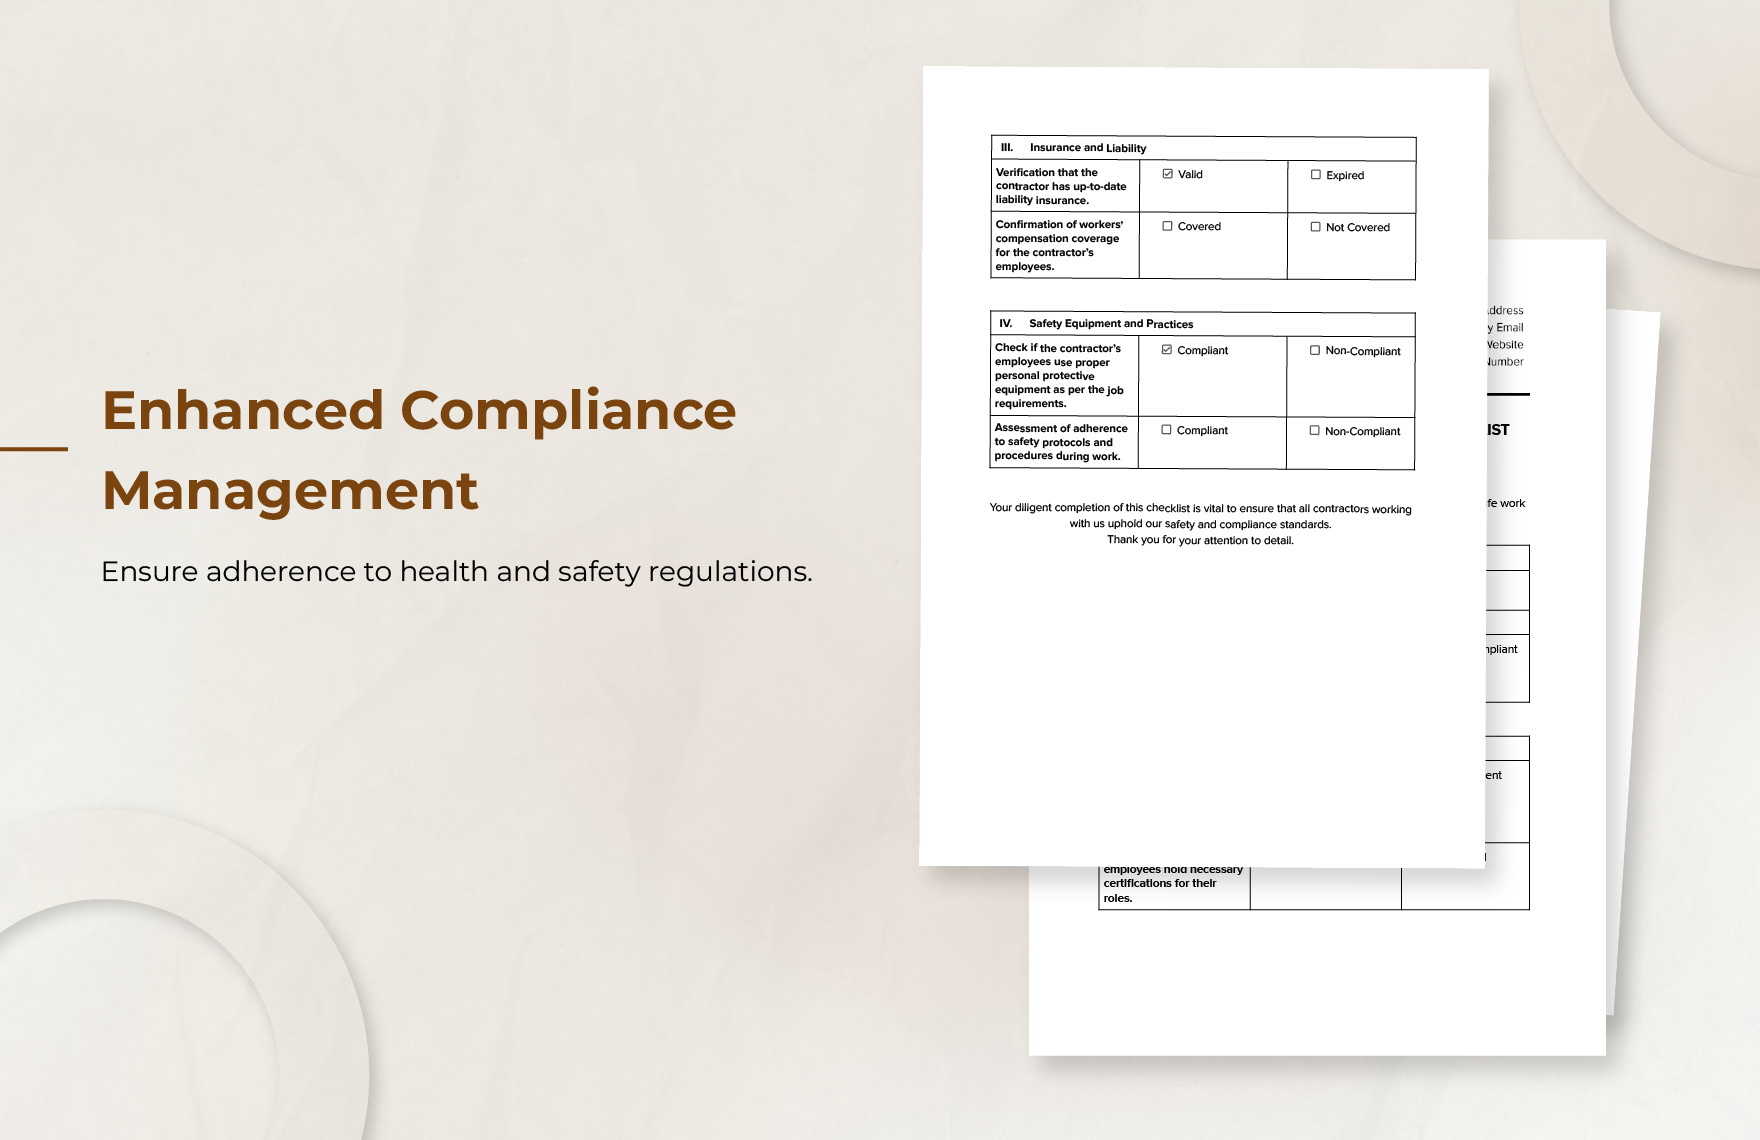 Workplace Contractor Compliance Checklist Template